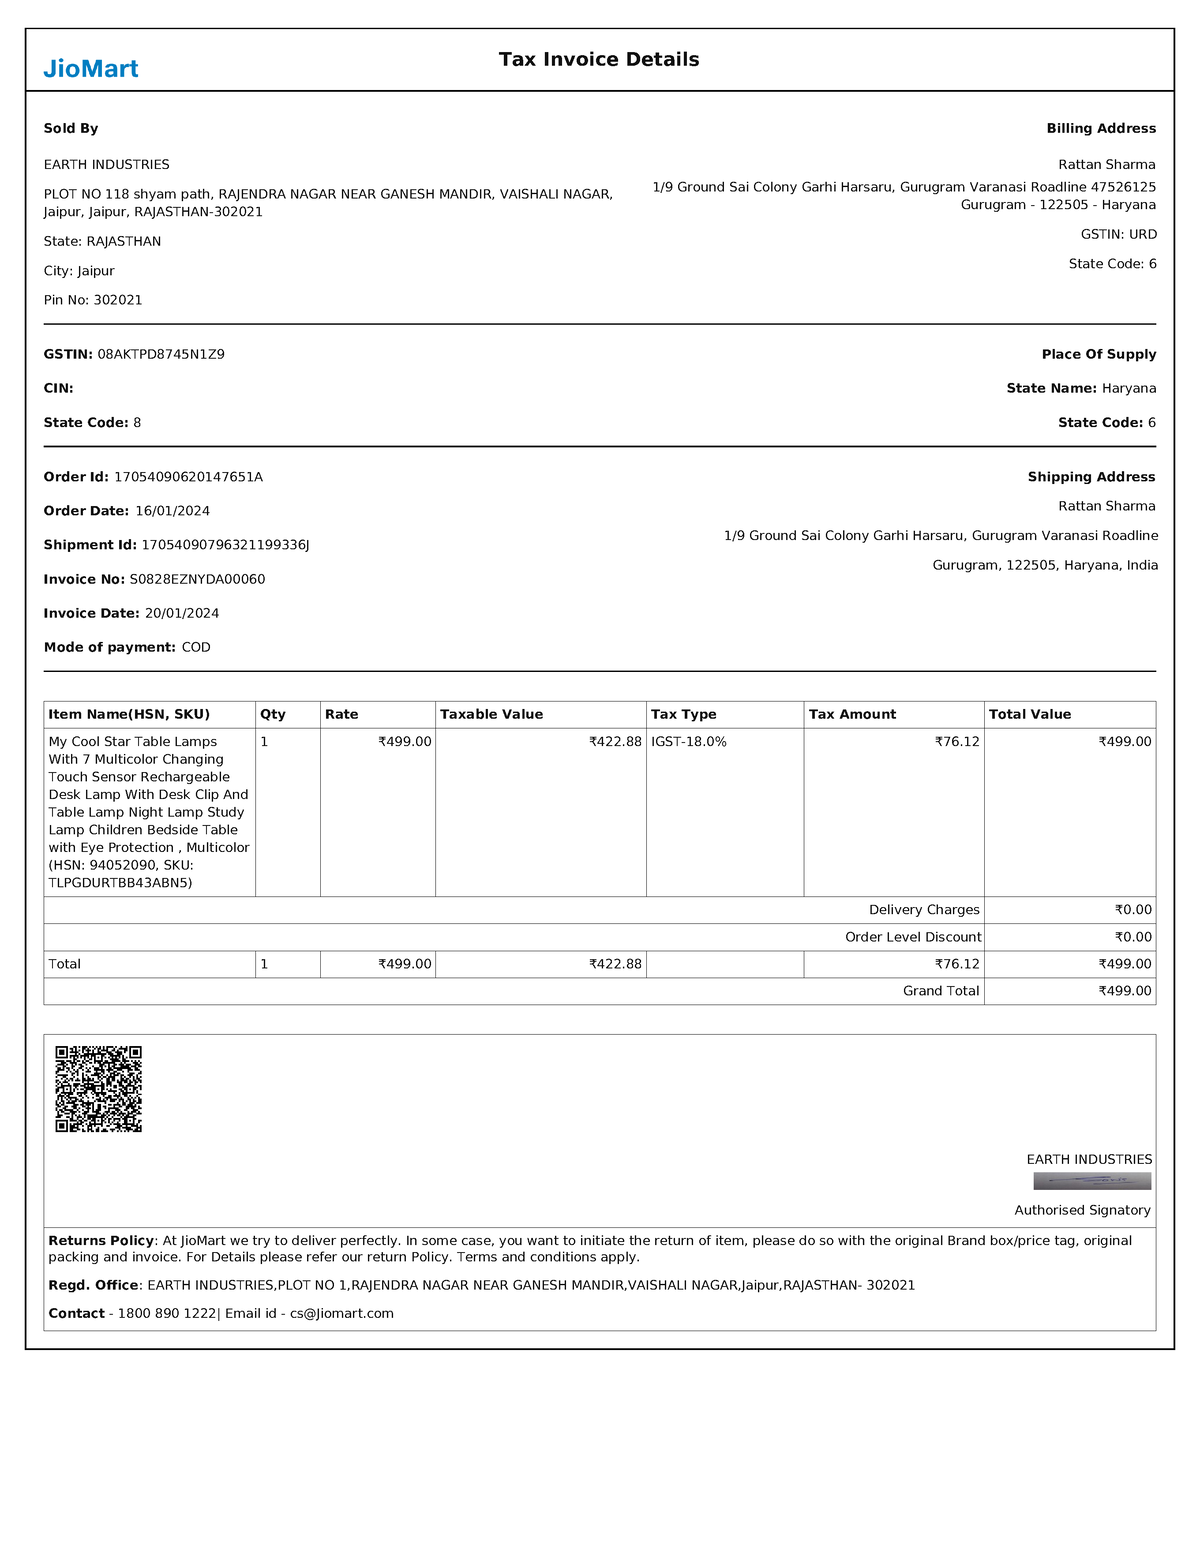 Jio Mart-Invoice-1705909568247 - Item Name(HSN, SKU) Qty Rate Taxable ...